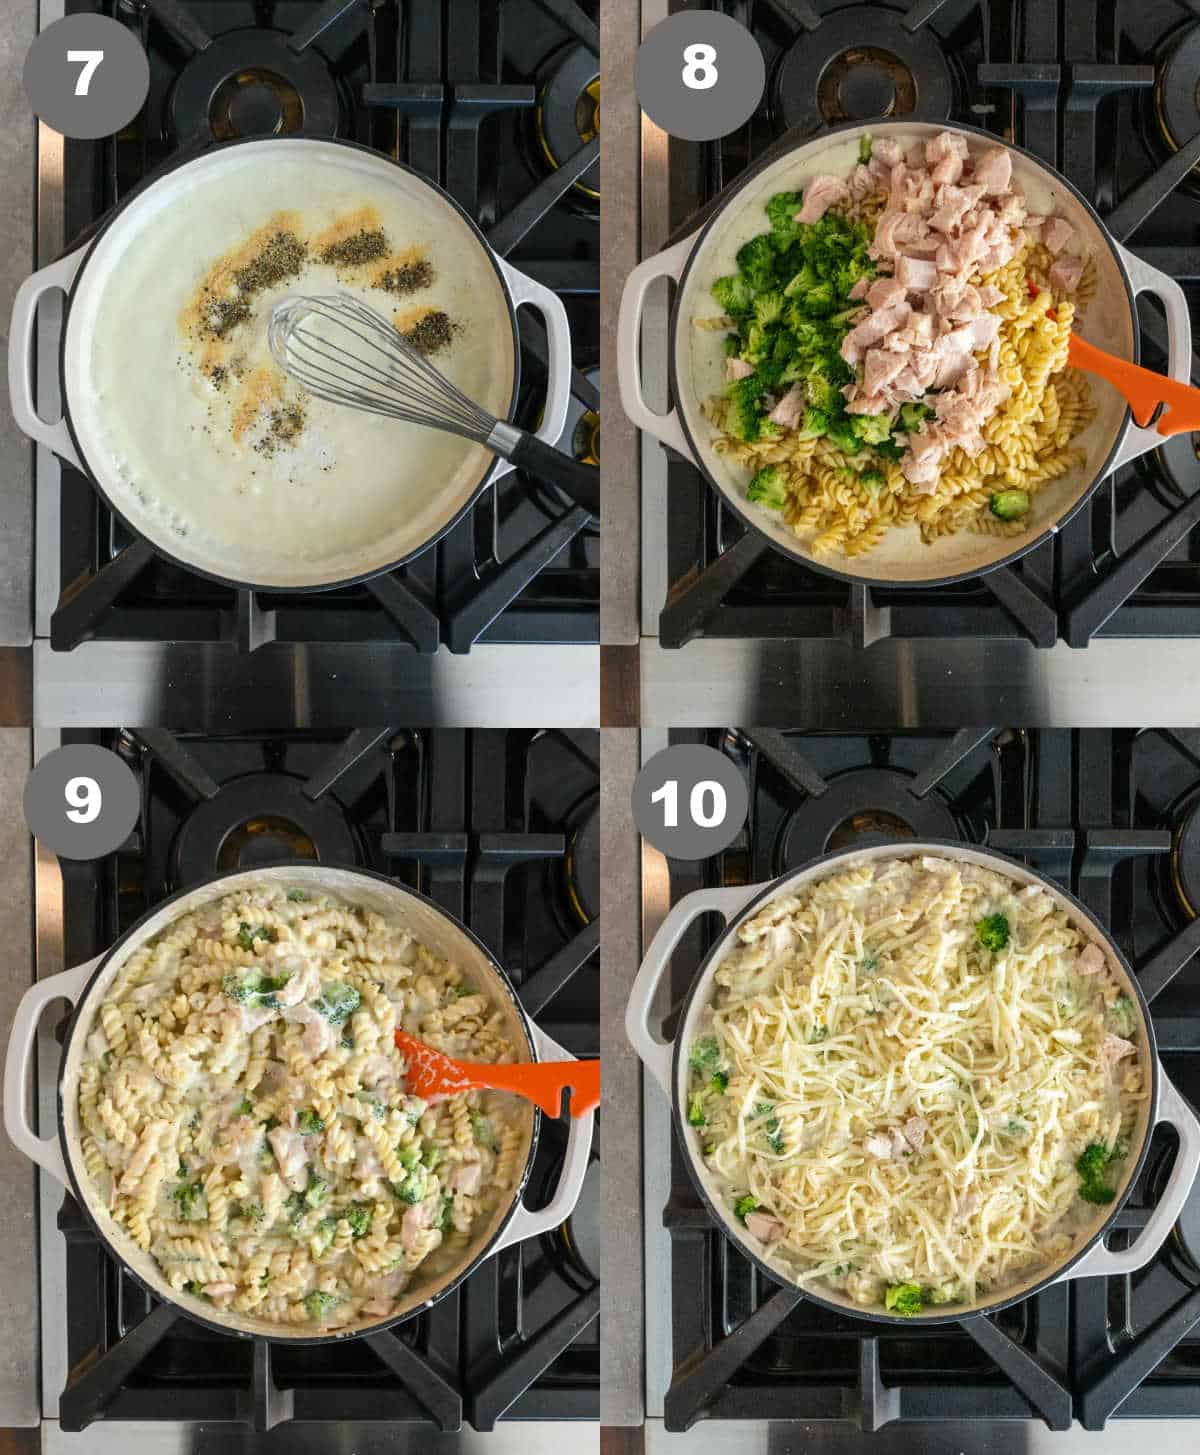 Steps 7 and 10 for making chicken broccoli alfredo pasta bake.